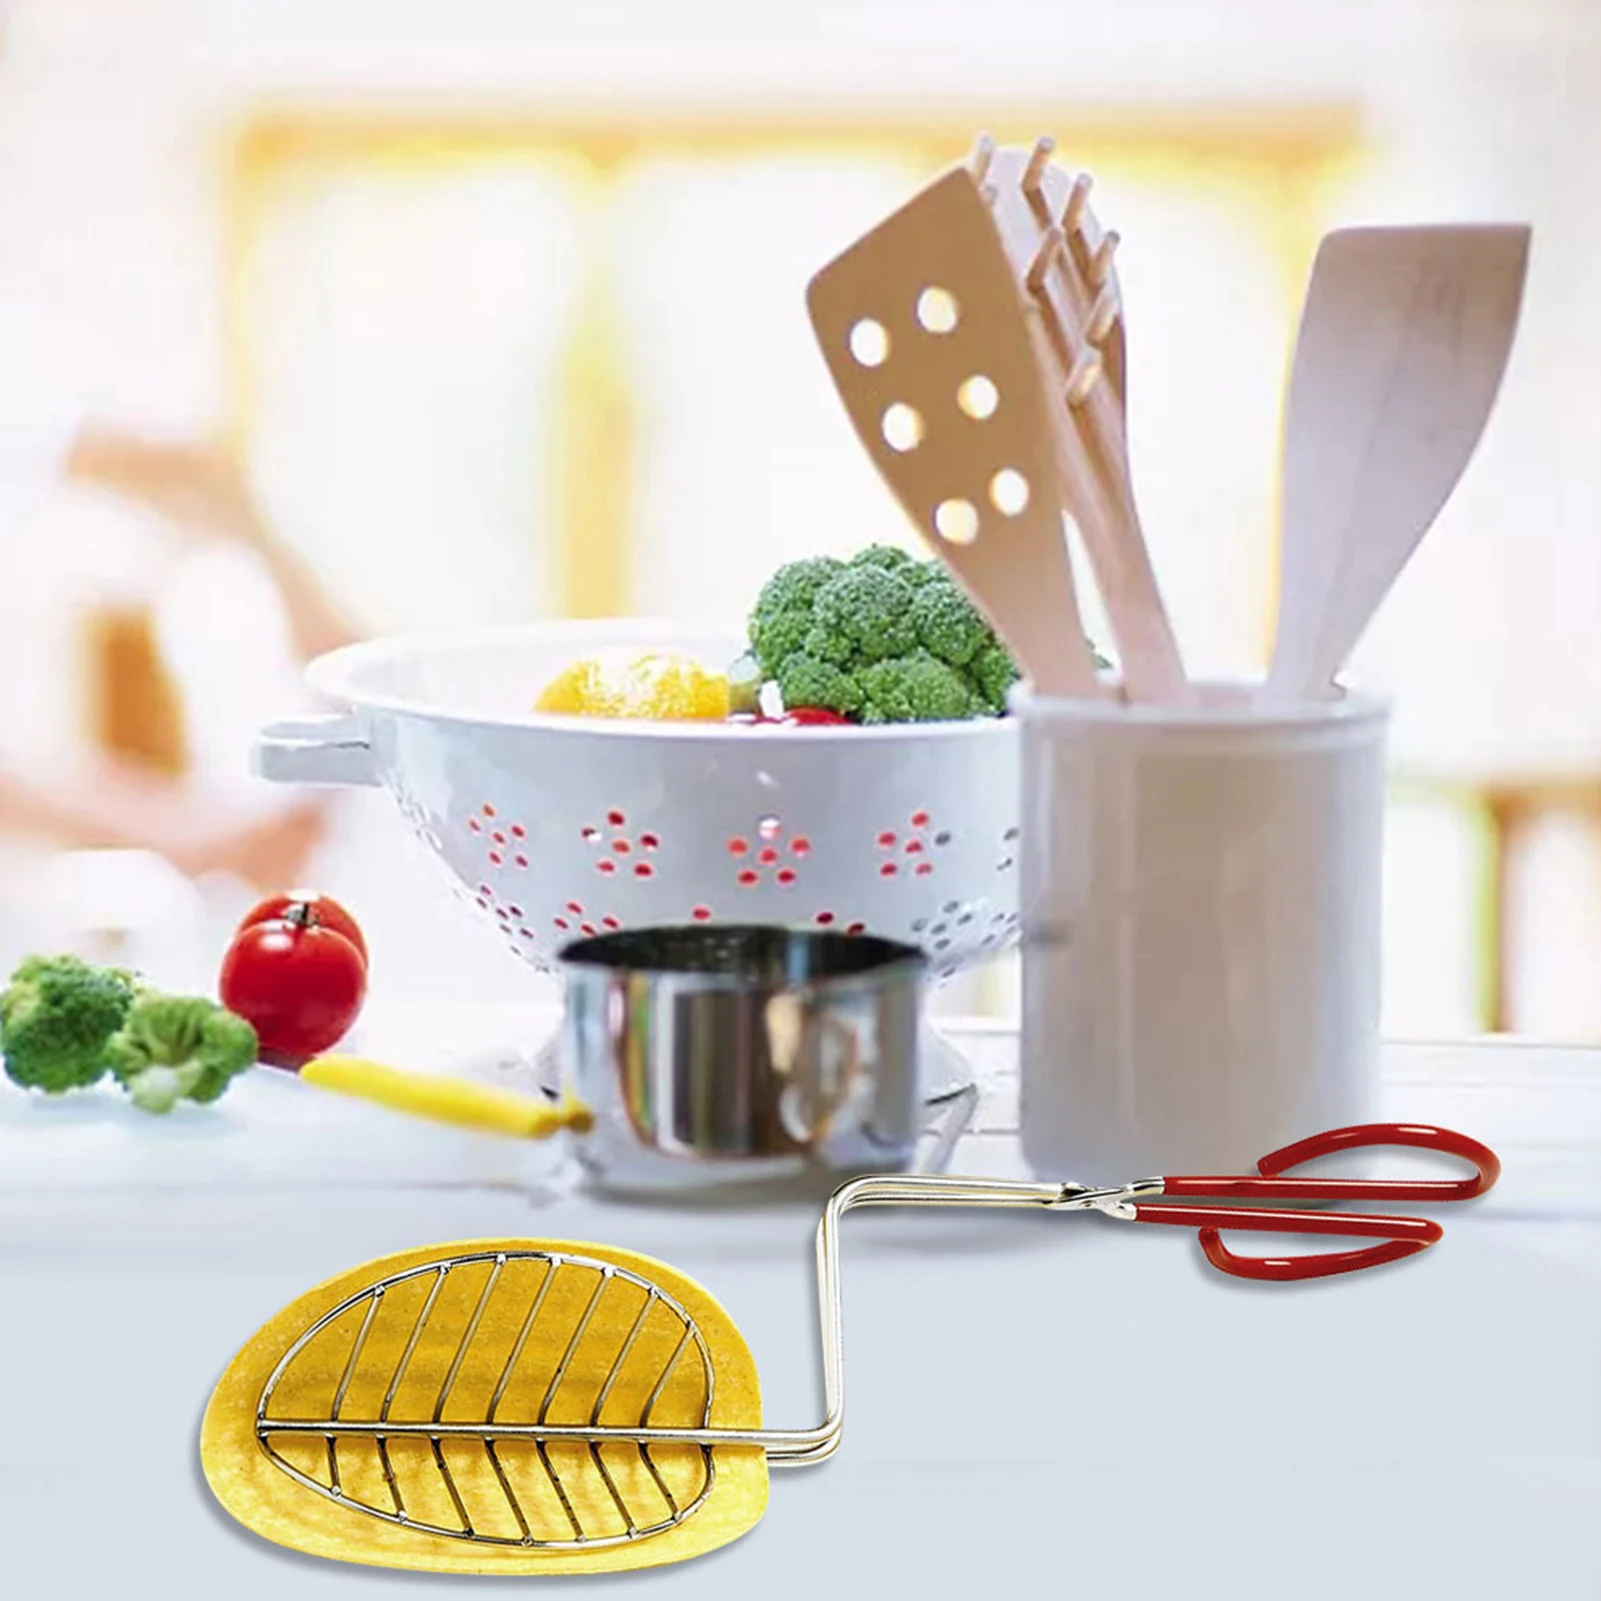 https://ae01.alicdn.com/kf/Sc637a79a748b464f9580dd00ac3edbe0f/Taco-Shell-Mold-For-Frying-Stainless-Steel-Mexican-Taco-Holder-With-Anti-scalding-Handle-Baking-Tools.jpg